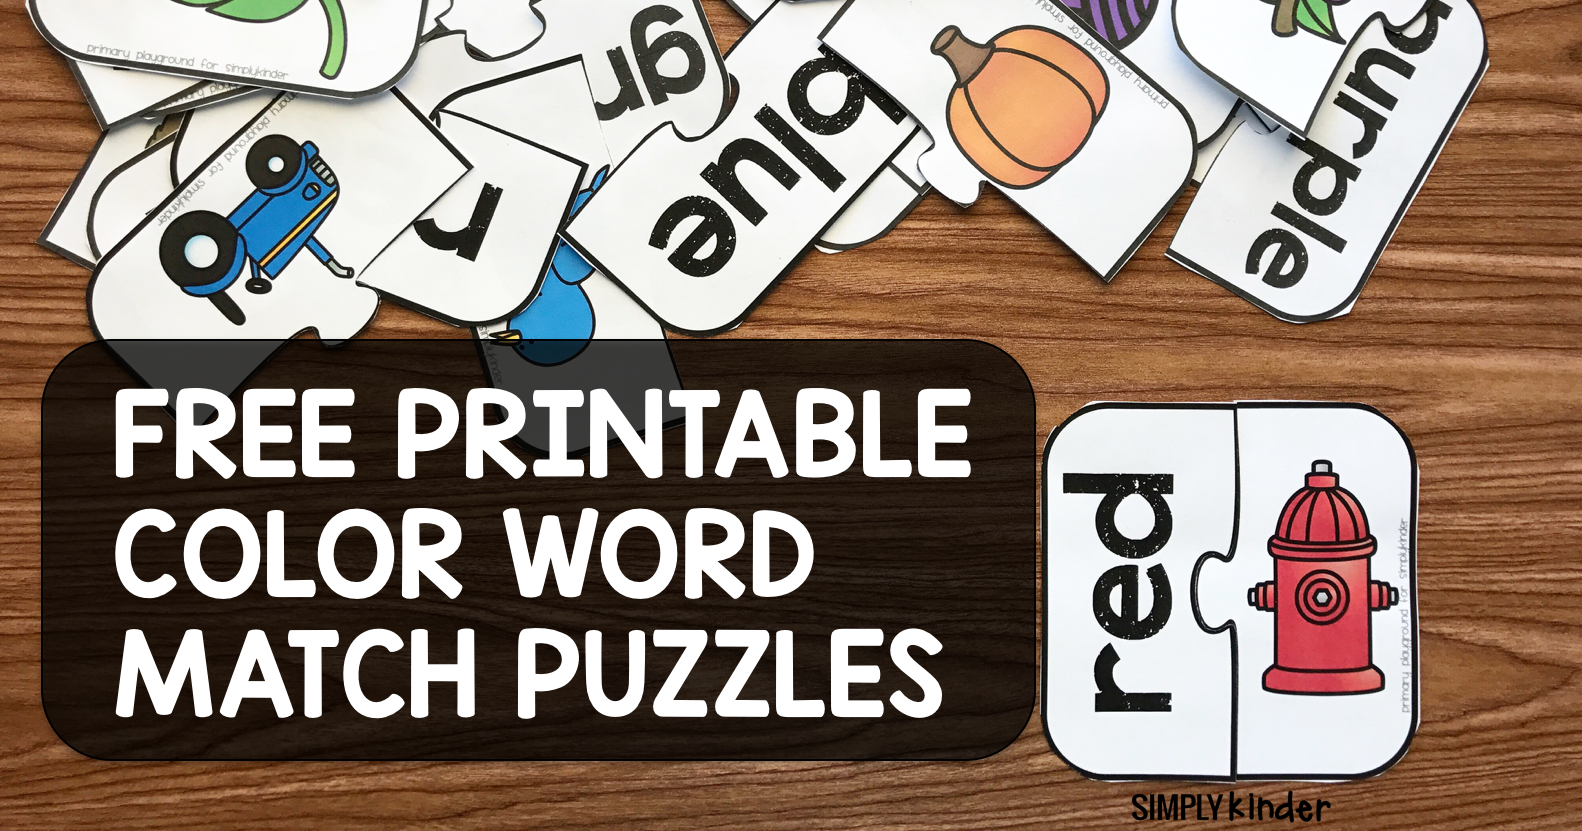 Free Printable Color Word Match Puzzles - Simply Kinder - Printable Office Puzzles